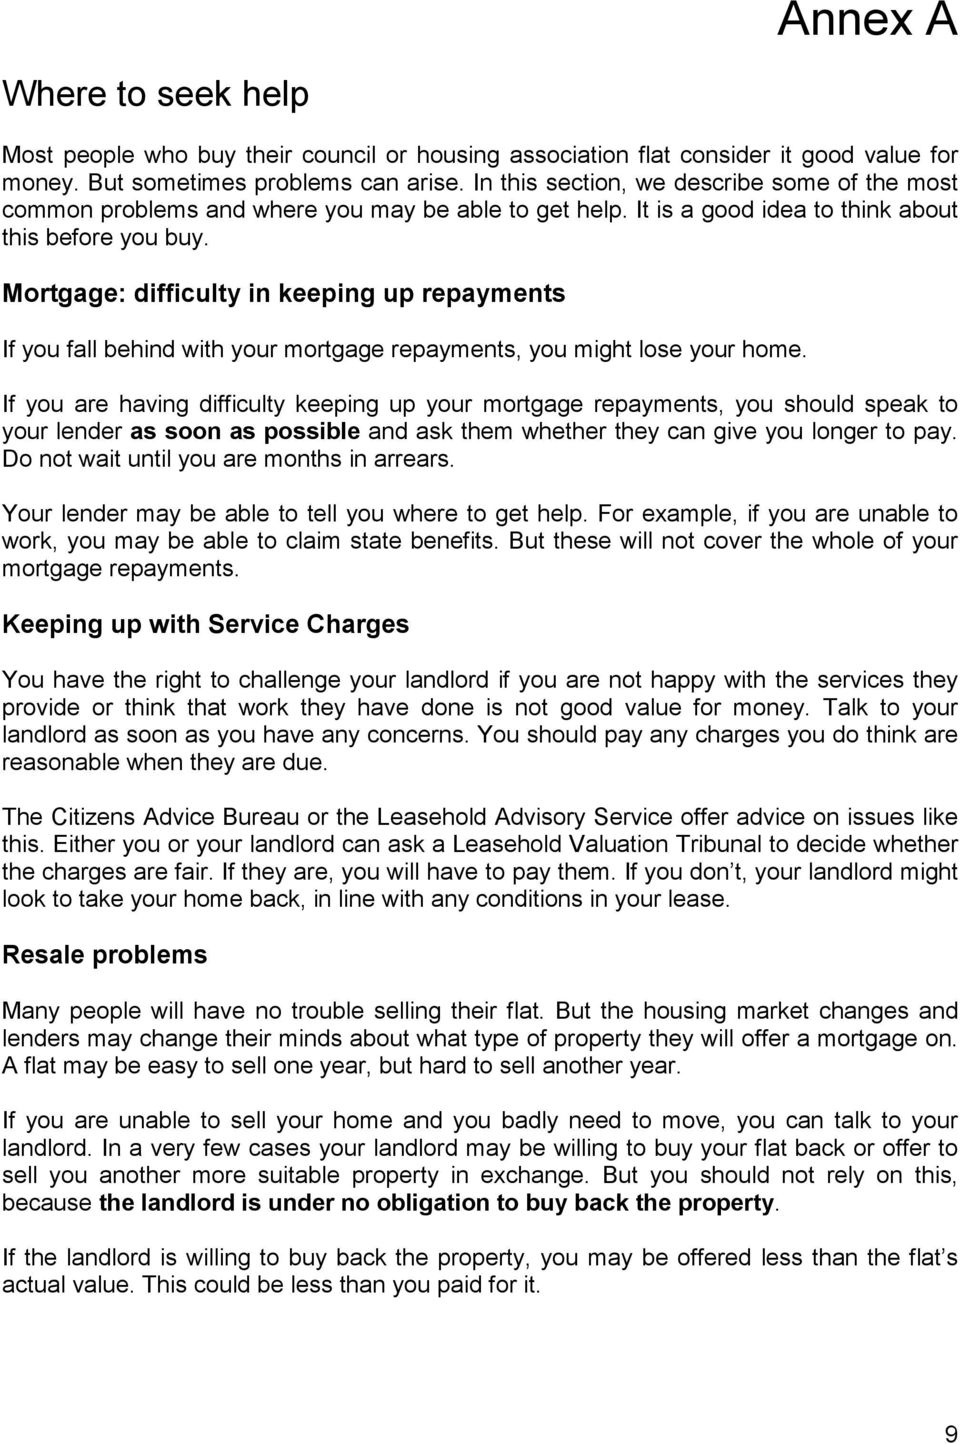 Mortgage: difficulty in keeping up repayments If you fall behind with your mortgage repayments, you might lose your home.